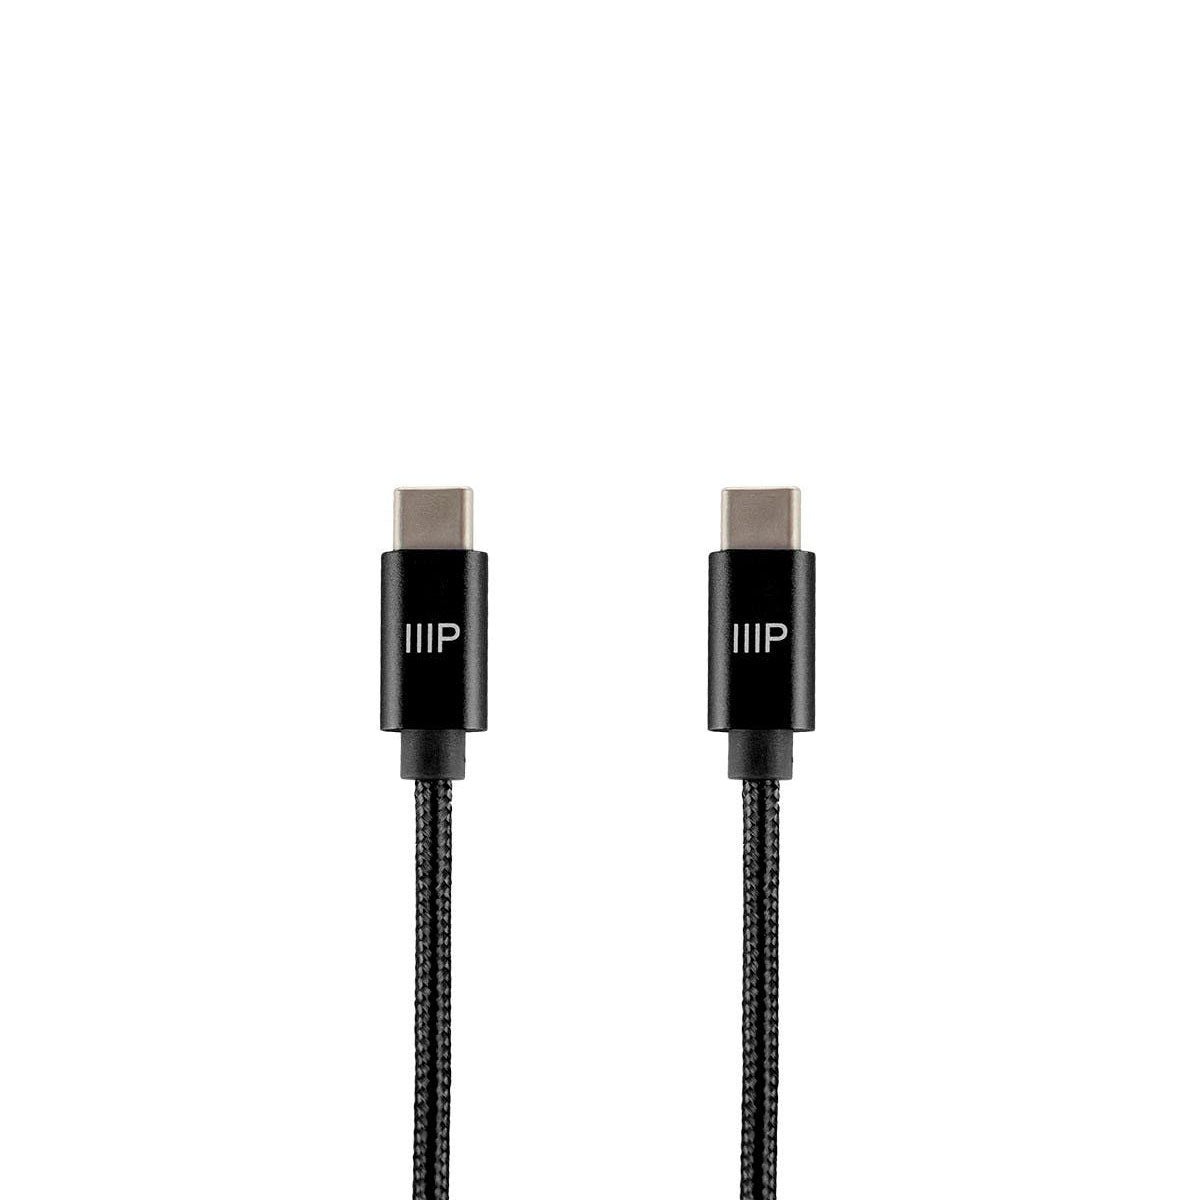 Monoprice Palette Series USB 2.0 Type-C to Type-C Cable, 10ft - Black View 2